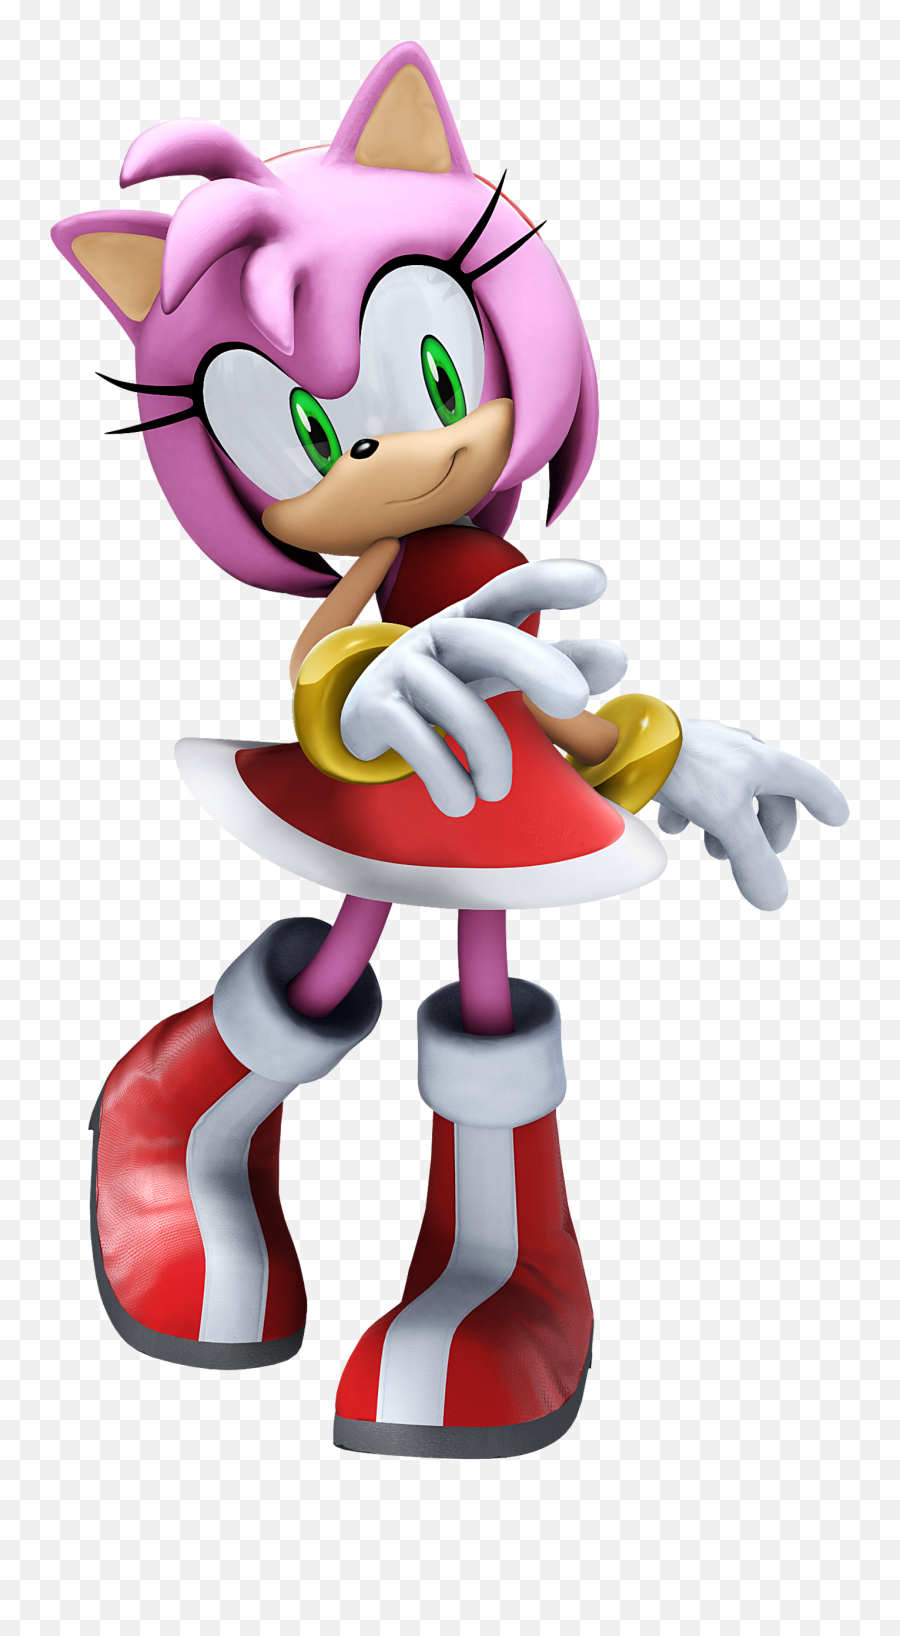 Sonic The Hedgehog - Amy Rose Gallery Sonic Scanf Amy Rose Sonic The Hedgehog Emoji,Sonic The Hedgehog Transparent